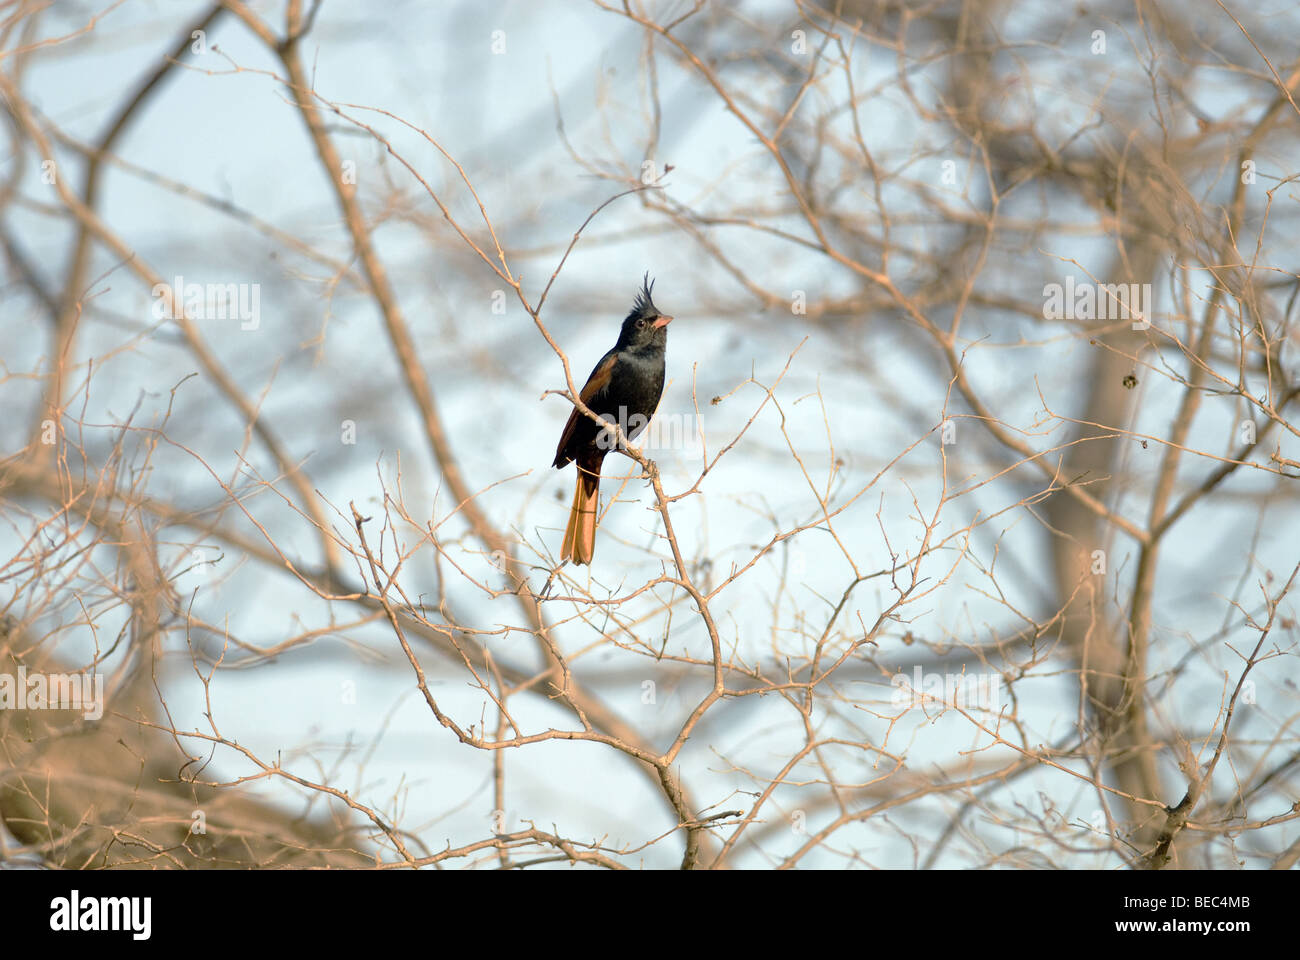 Crested bunting perched in tree Stock Photo